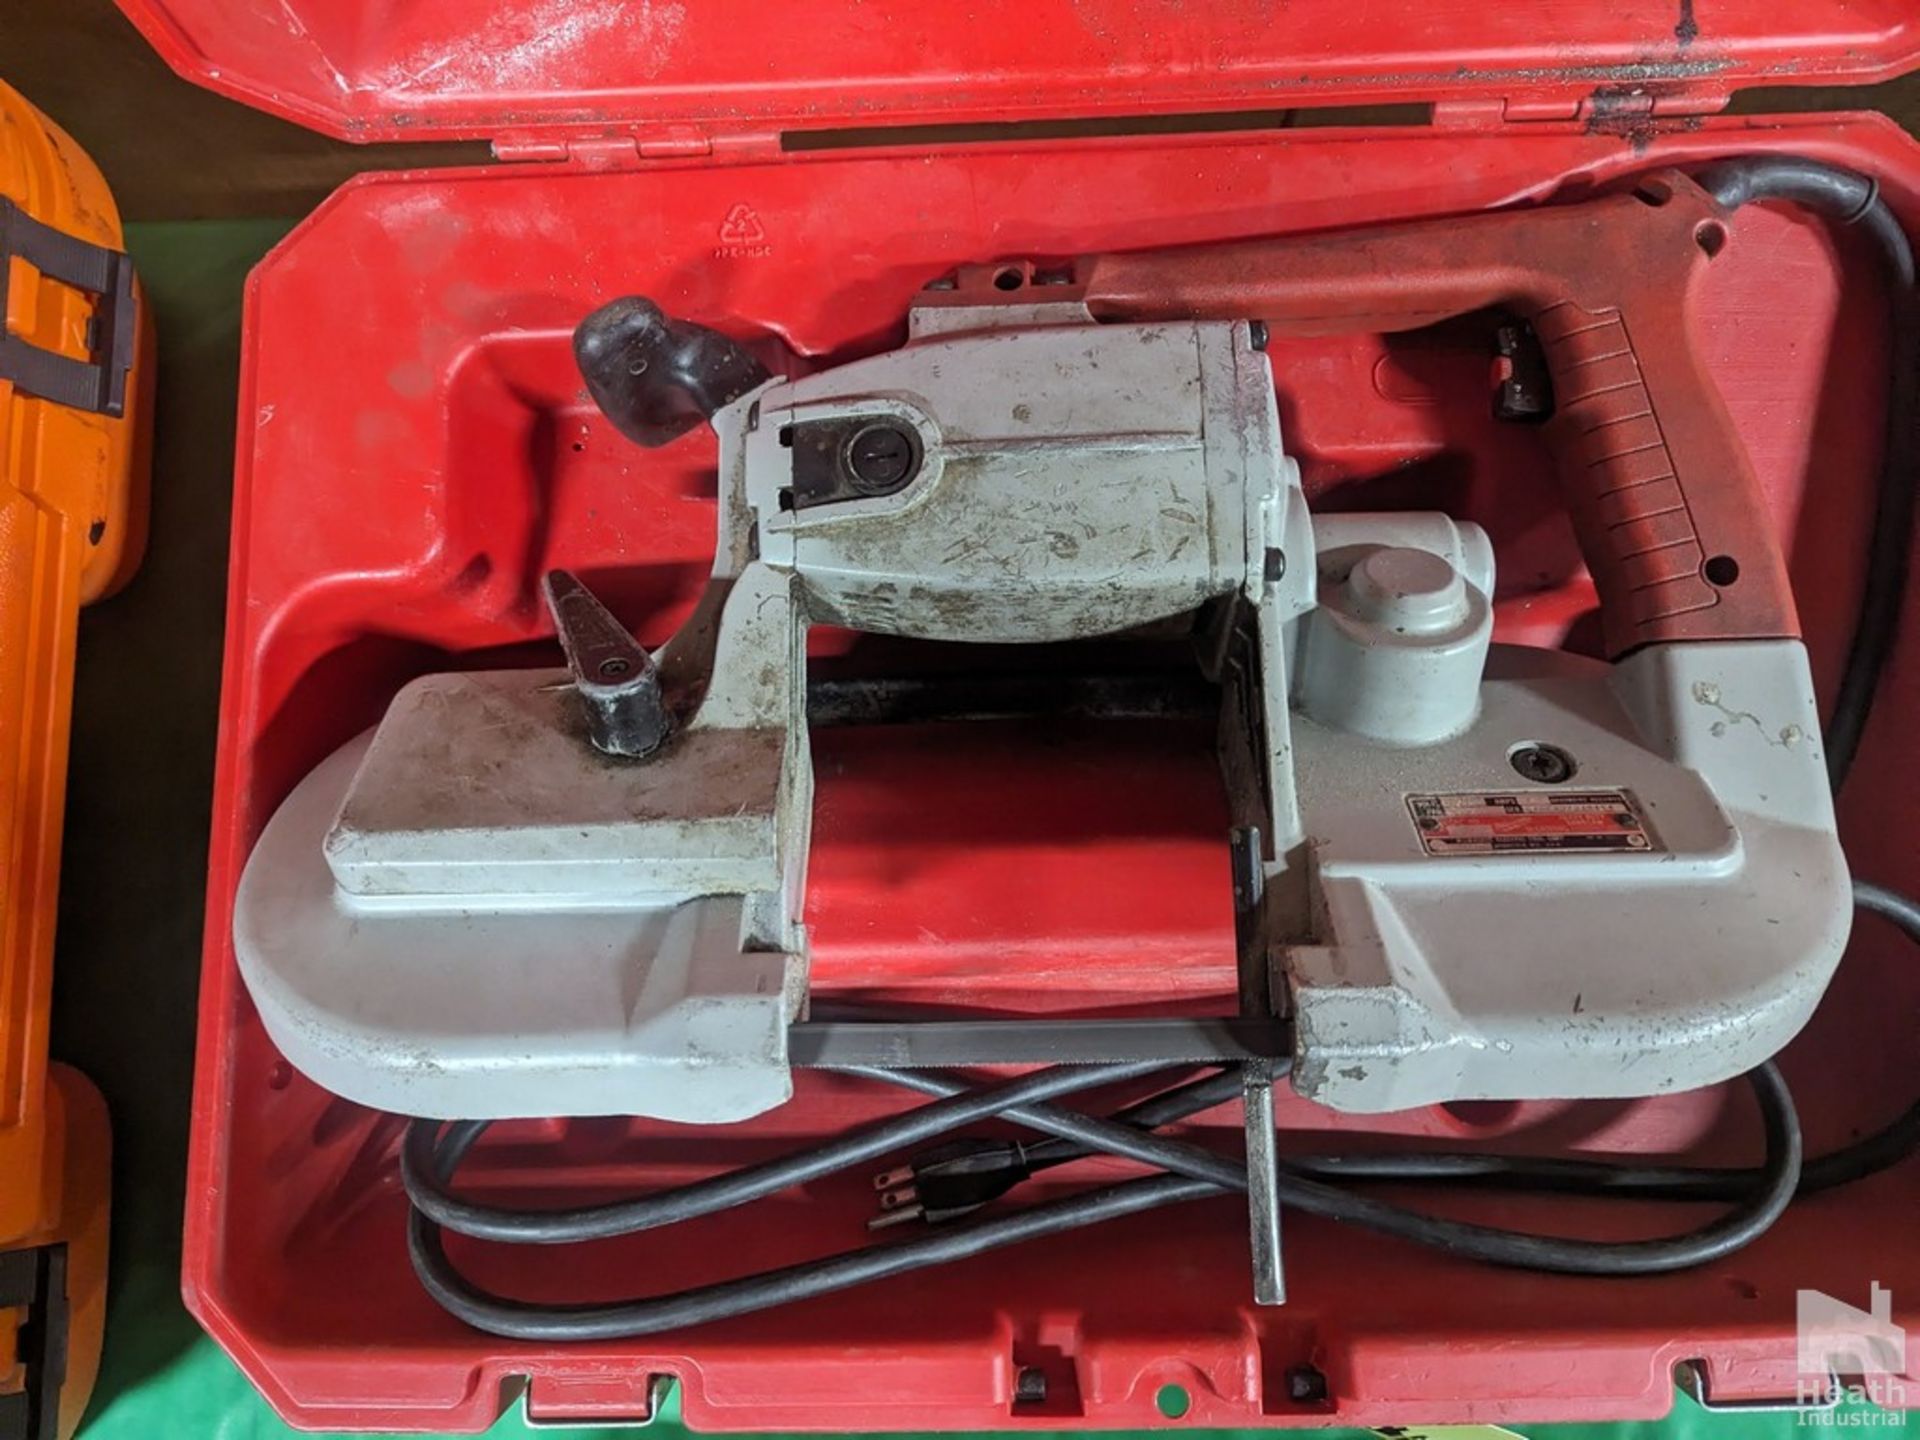 MILWAUKEE 6230 HEAVY DUTY BANDSAW WITH CASE - Image 2 of 3